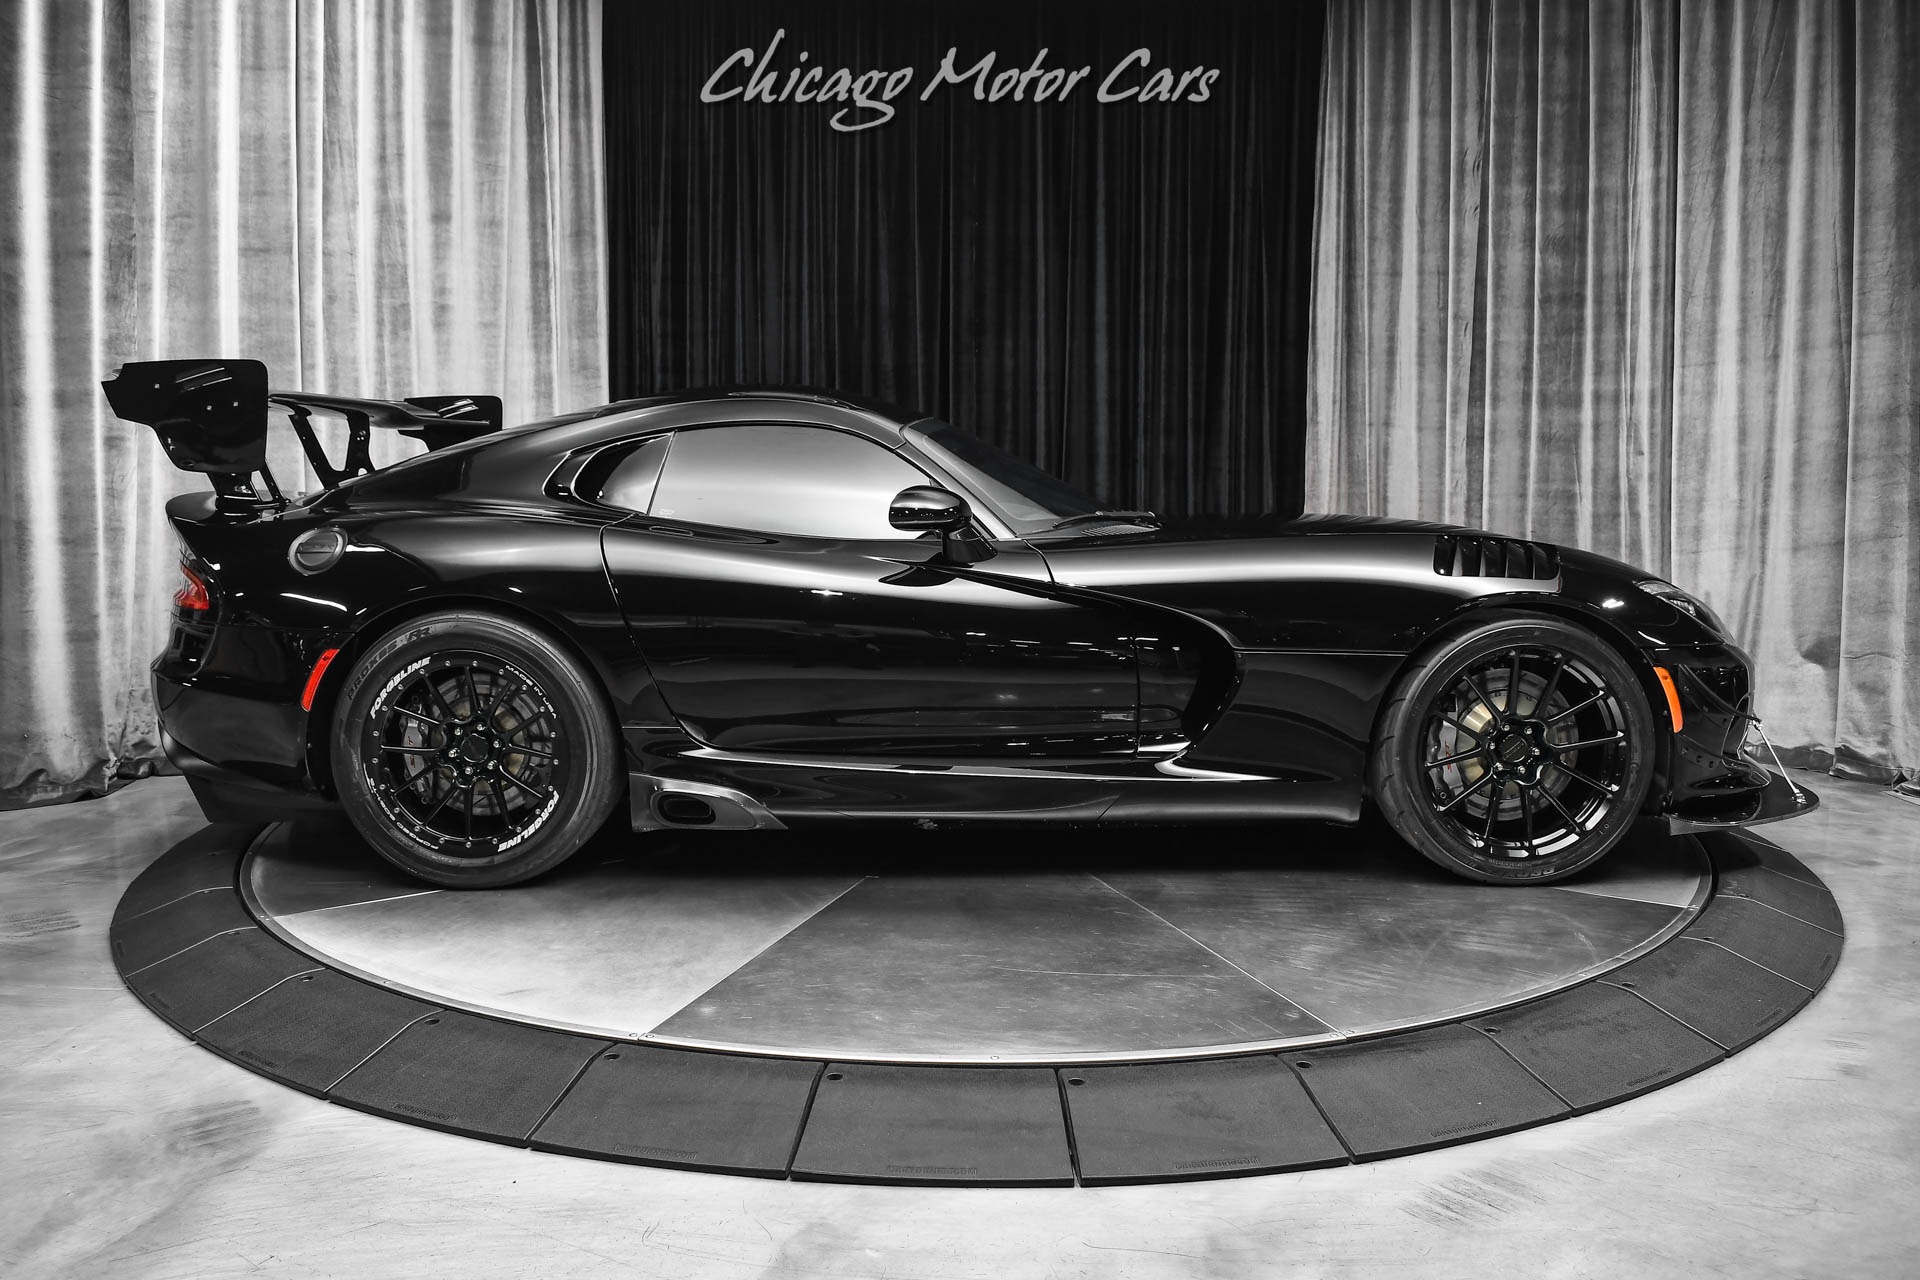 Used-2016-Dodge-Viper-ACR-Extreme-Aero-Coupe-Twin-Turbo-FULLY-Built-Motor-2000-WHP-LOADED